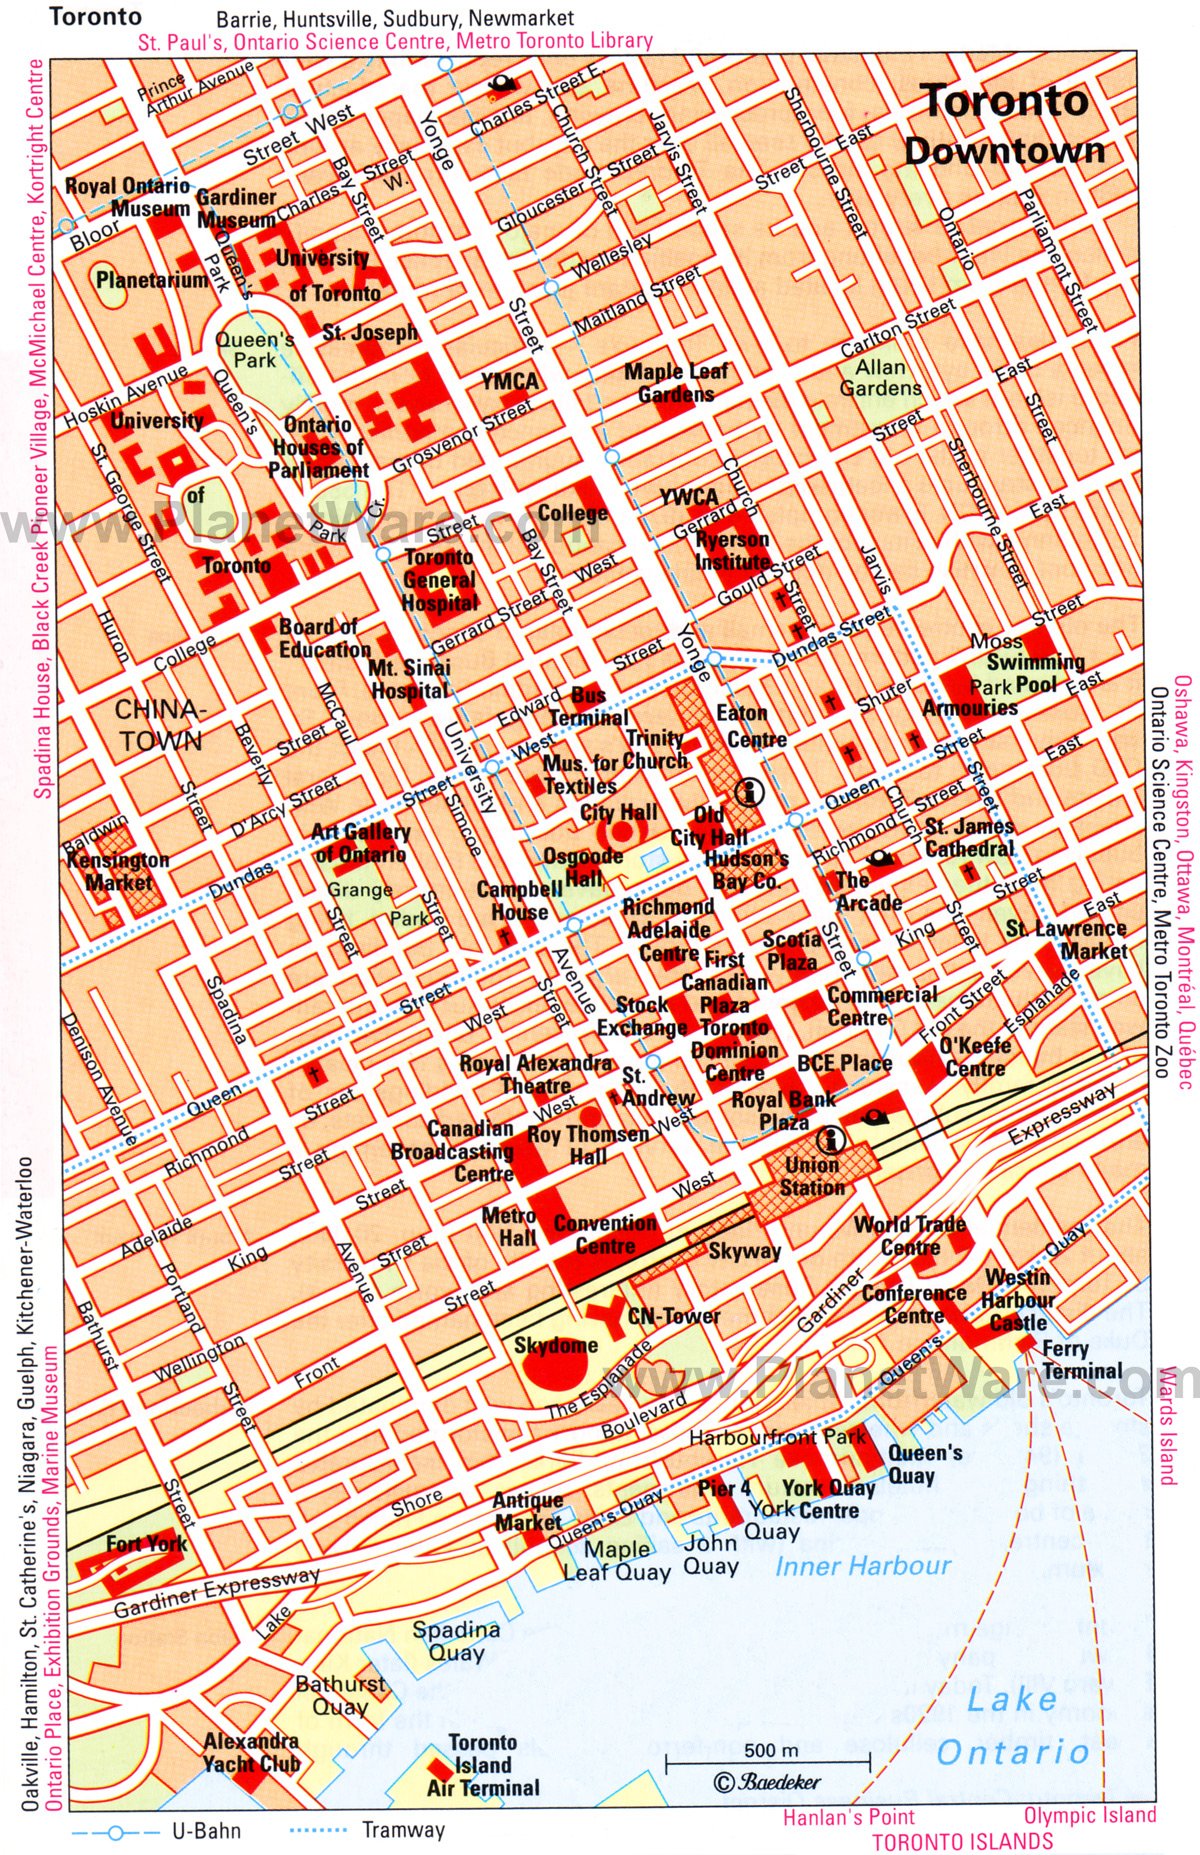 Toronto Downtown Map - Tourist Attractions